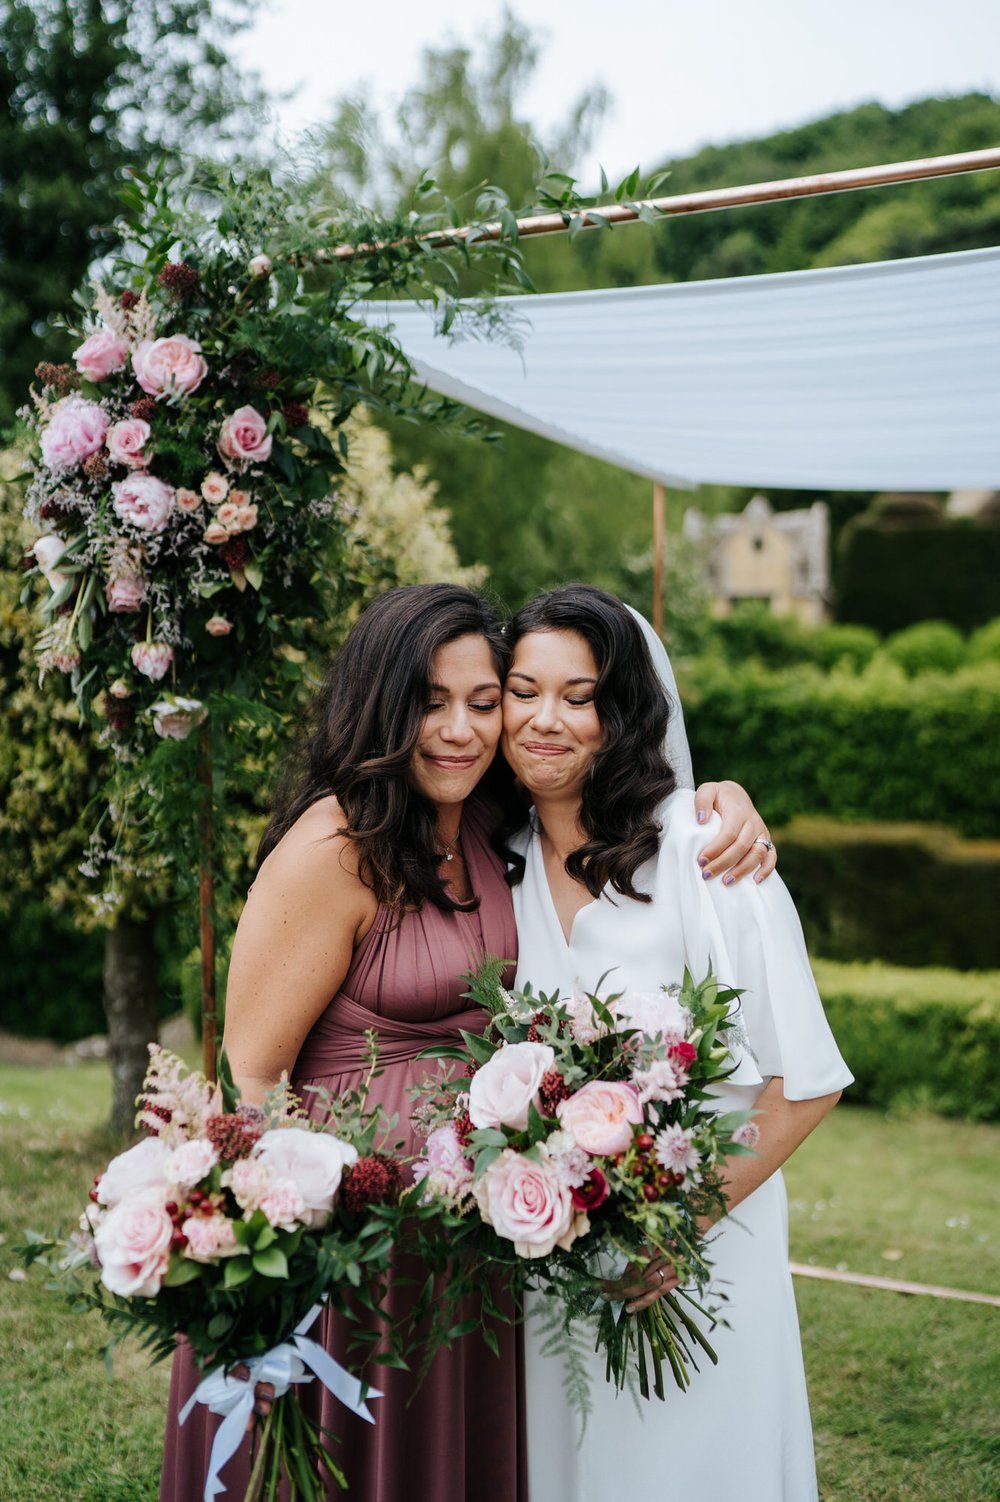 Bride and bride's sister embrace each other lovingly during candid moment in between staged family photos 